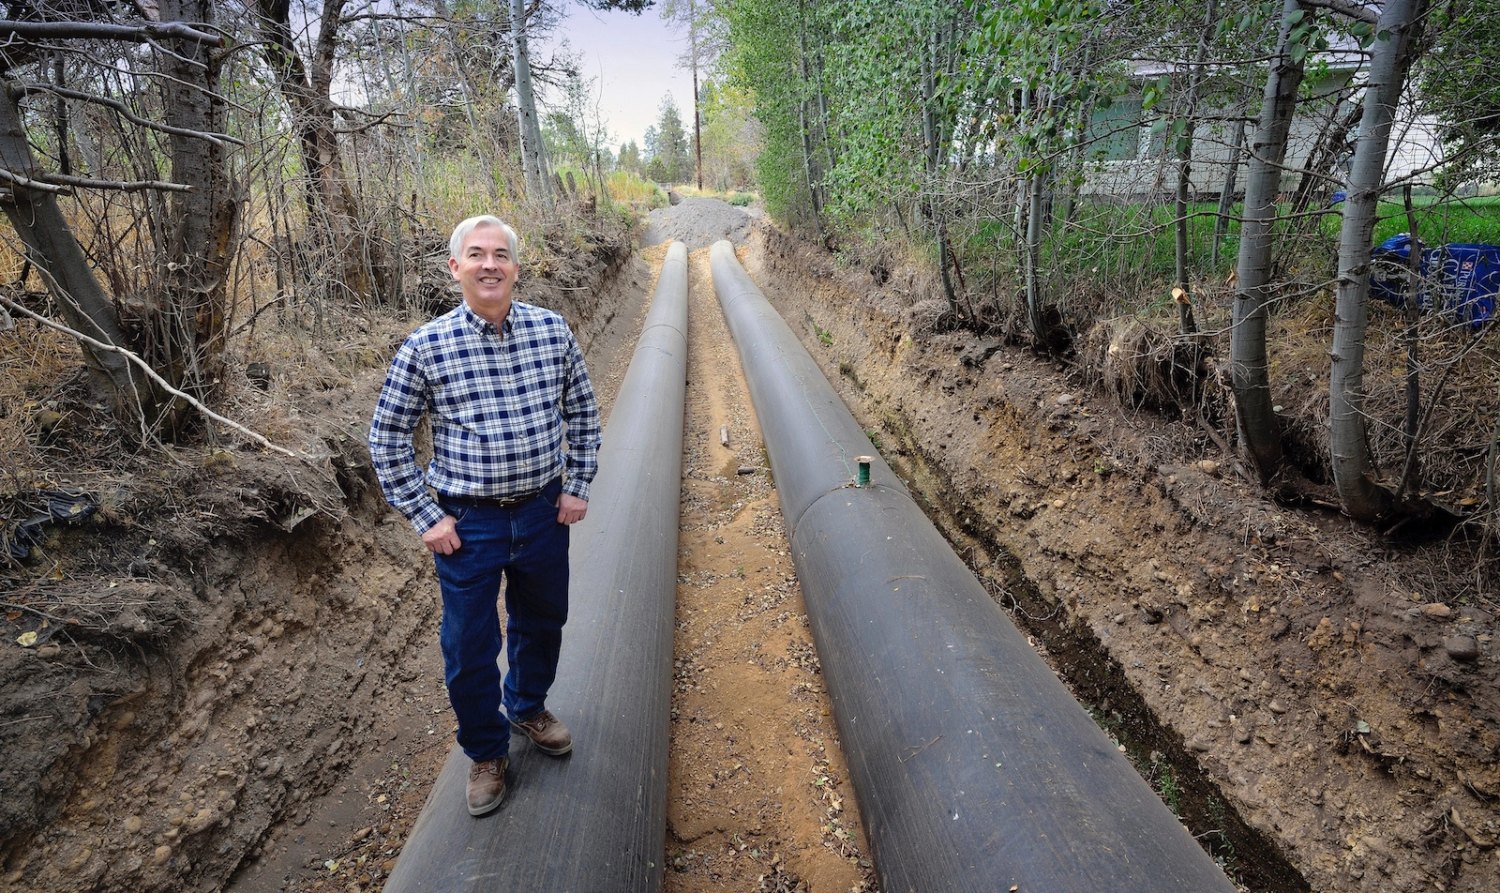 In Oregon, farmers are revamping century-old irrigation canals to stem water loss